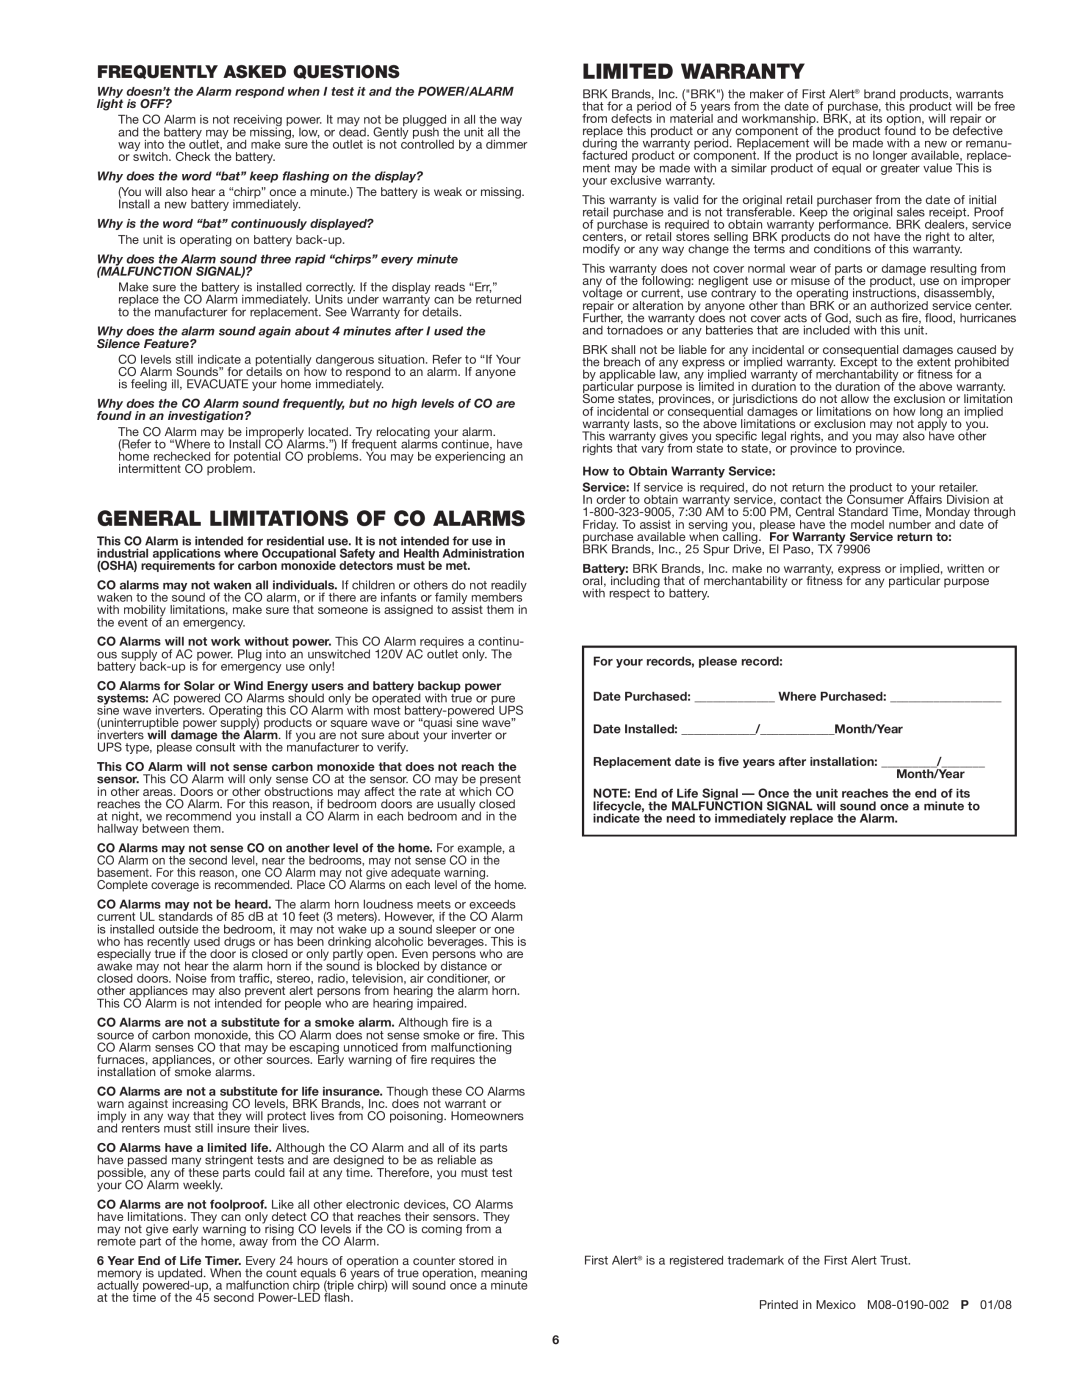 First Alert co614 user manual General Limitations Of Co Alarms, Limited Warranty, Frequently Asked Questions 